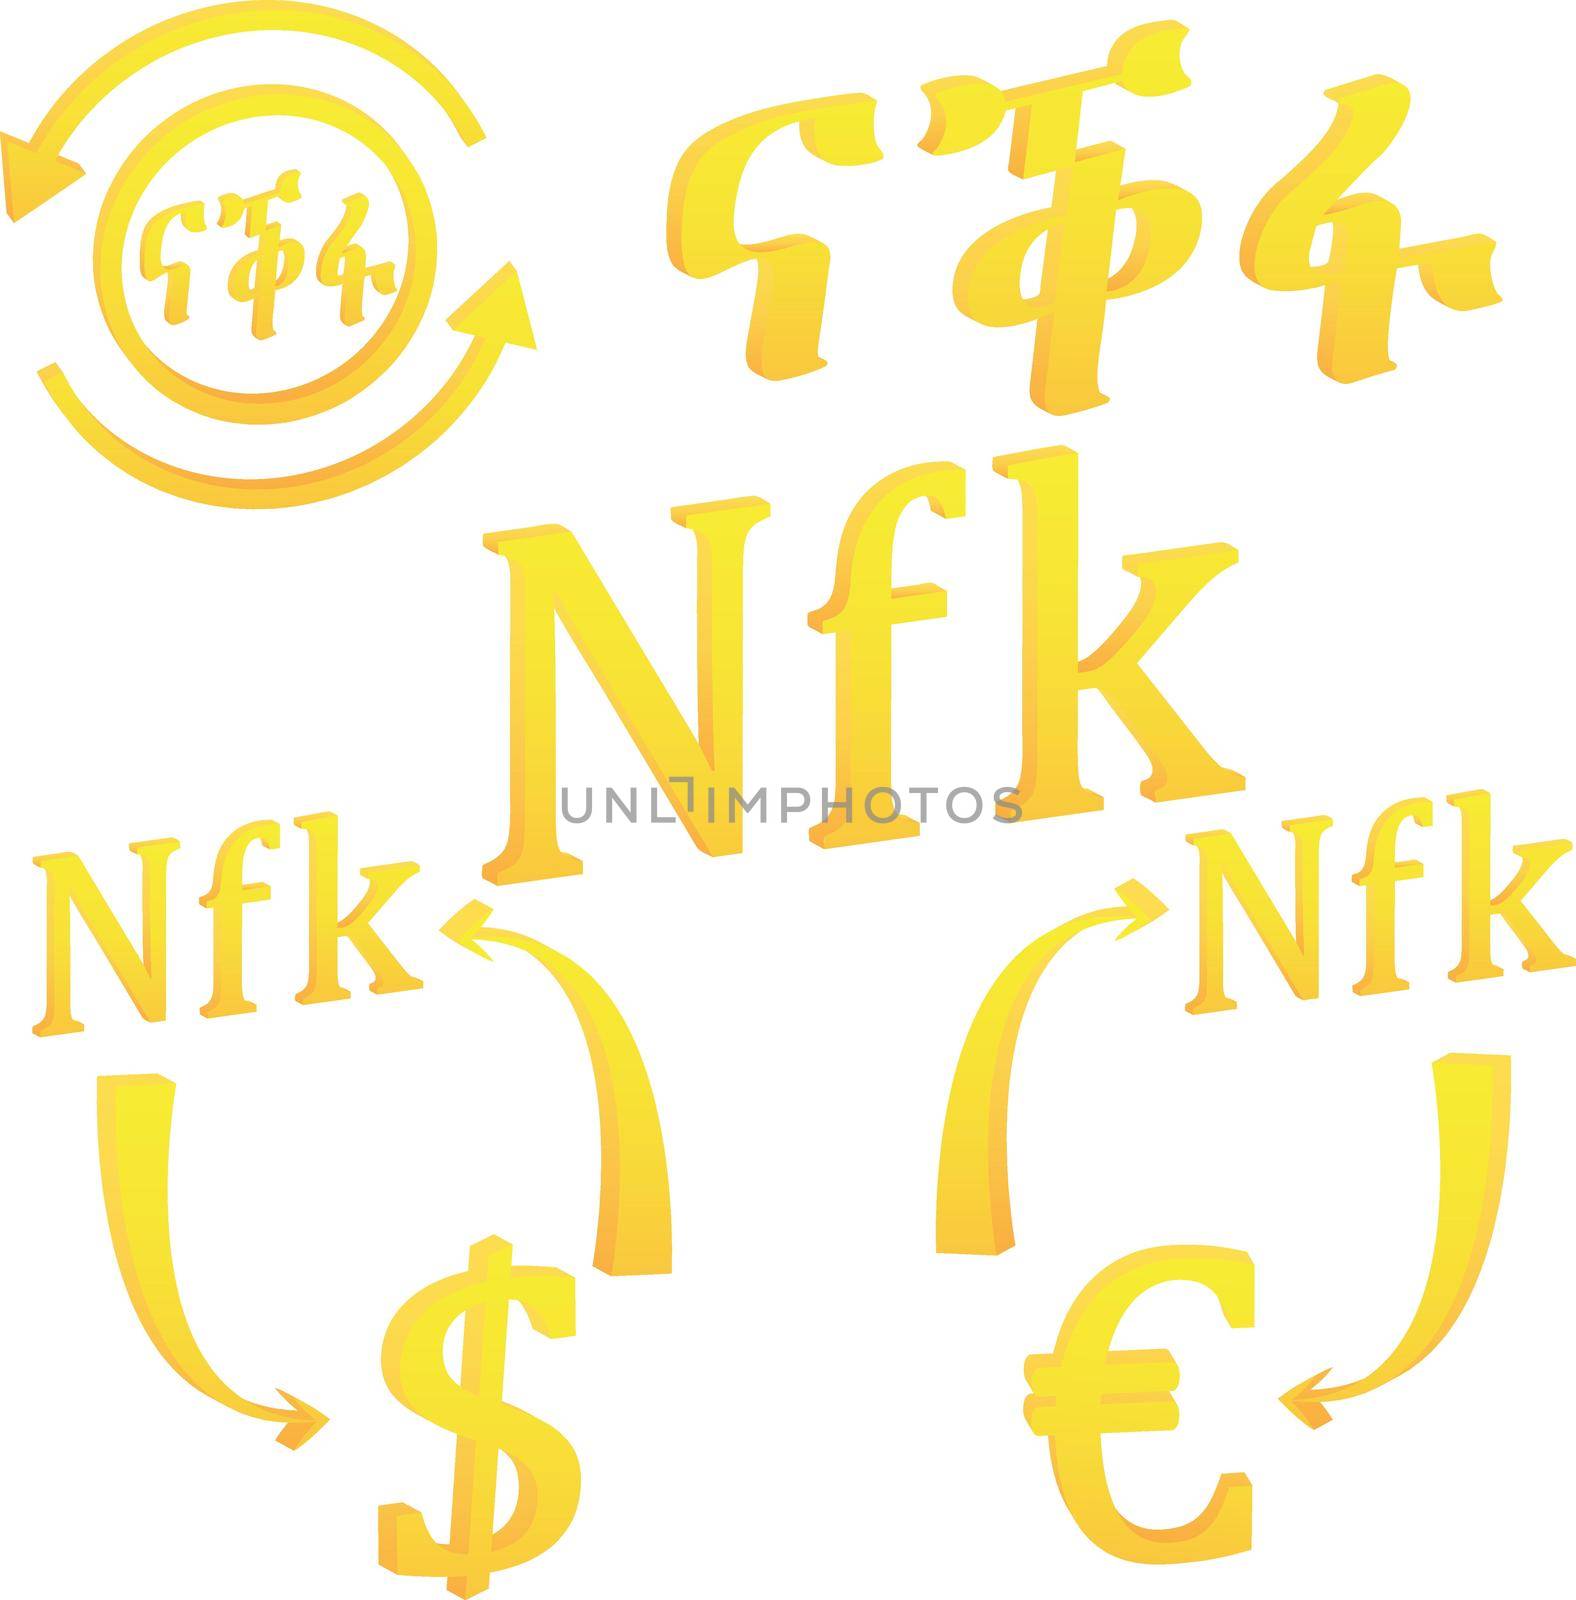 Eritrean Nakfa currency symbol icon of Eritrea vector illustration on a white background